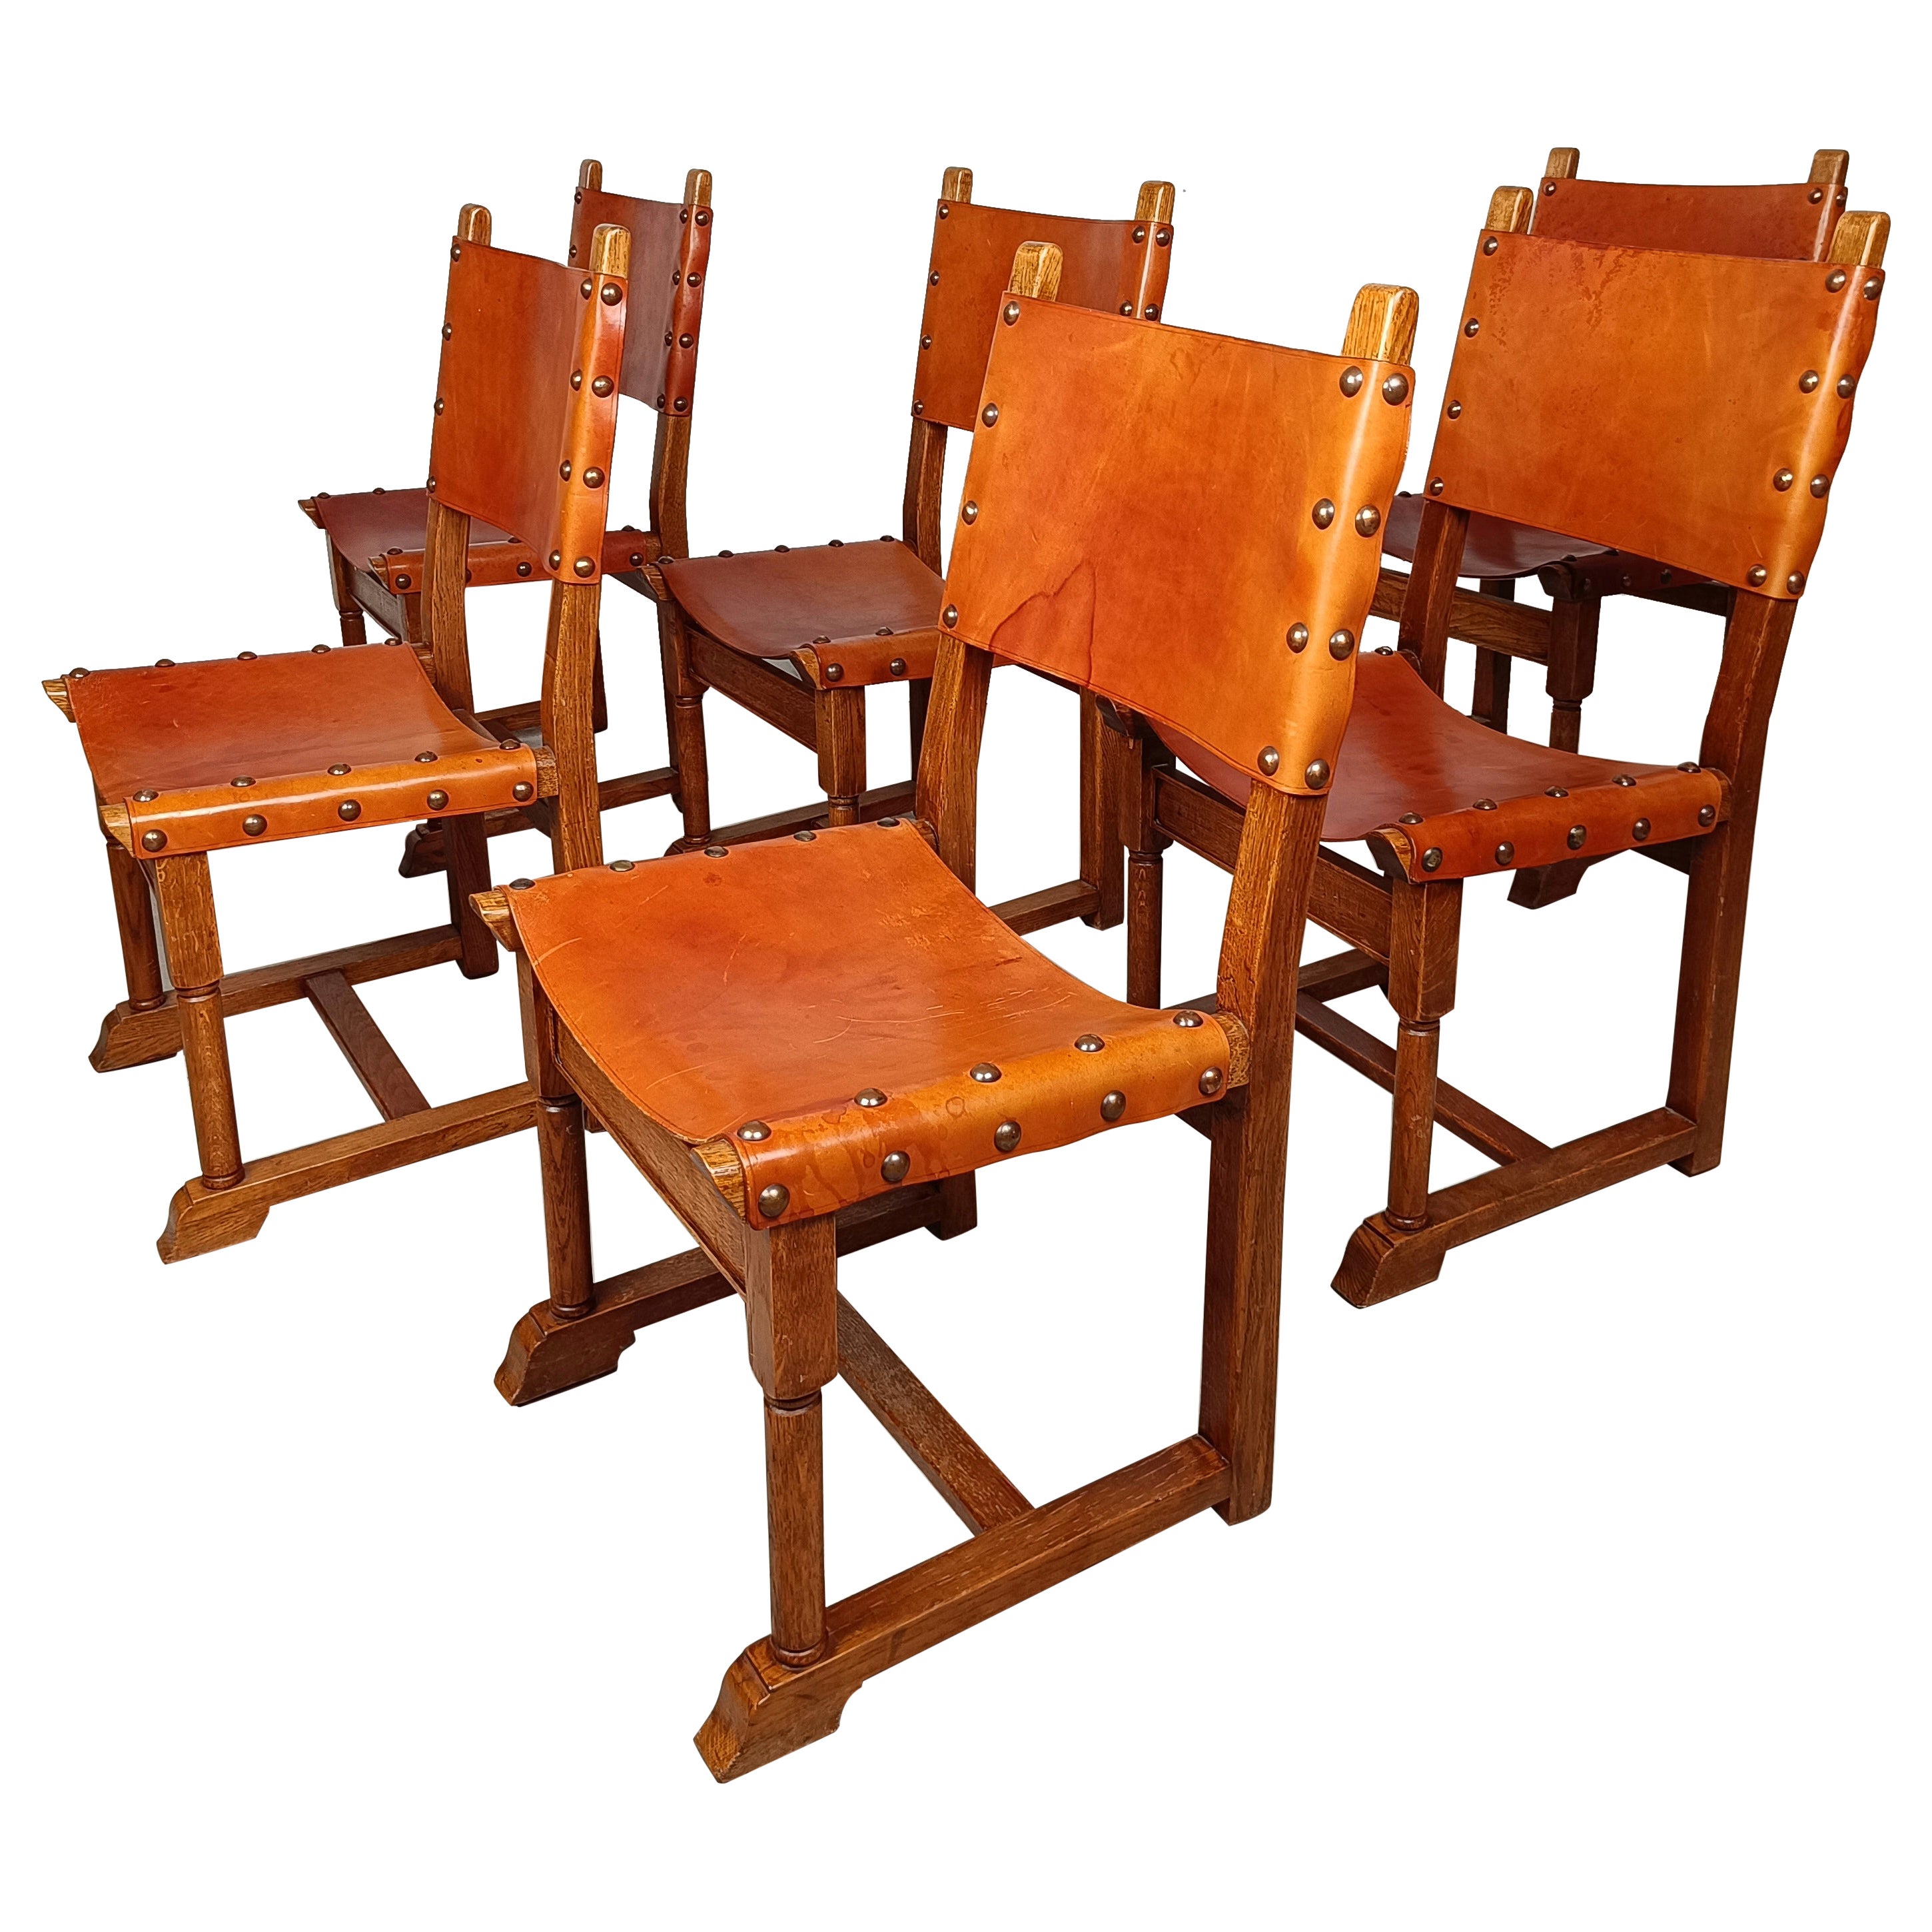 Set of Six Rustic Italian Chairs in Cognac Studded Leather and solid Oak Wood 